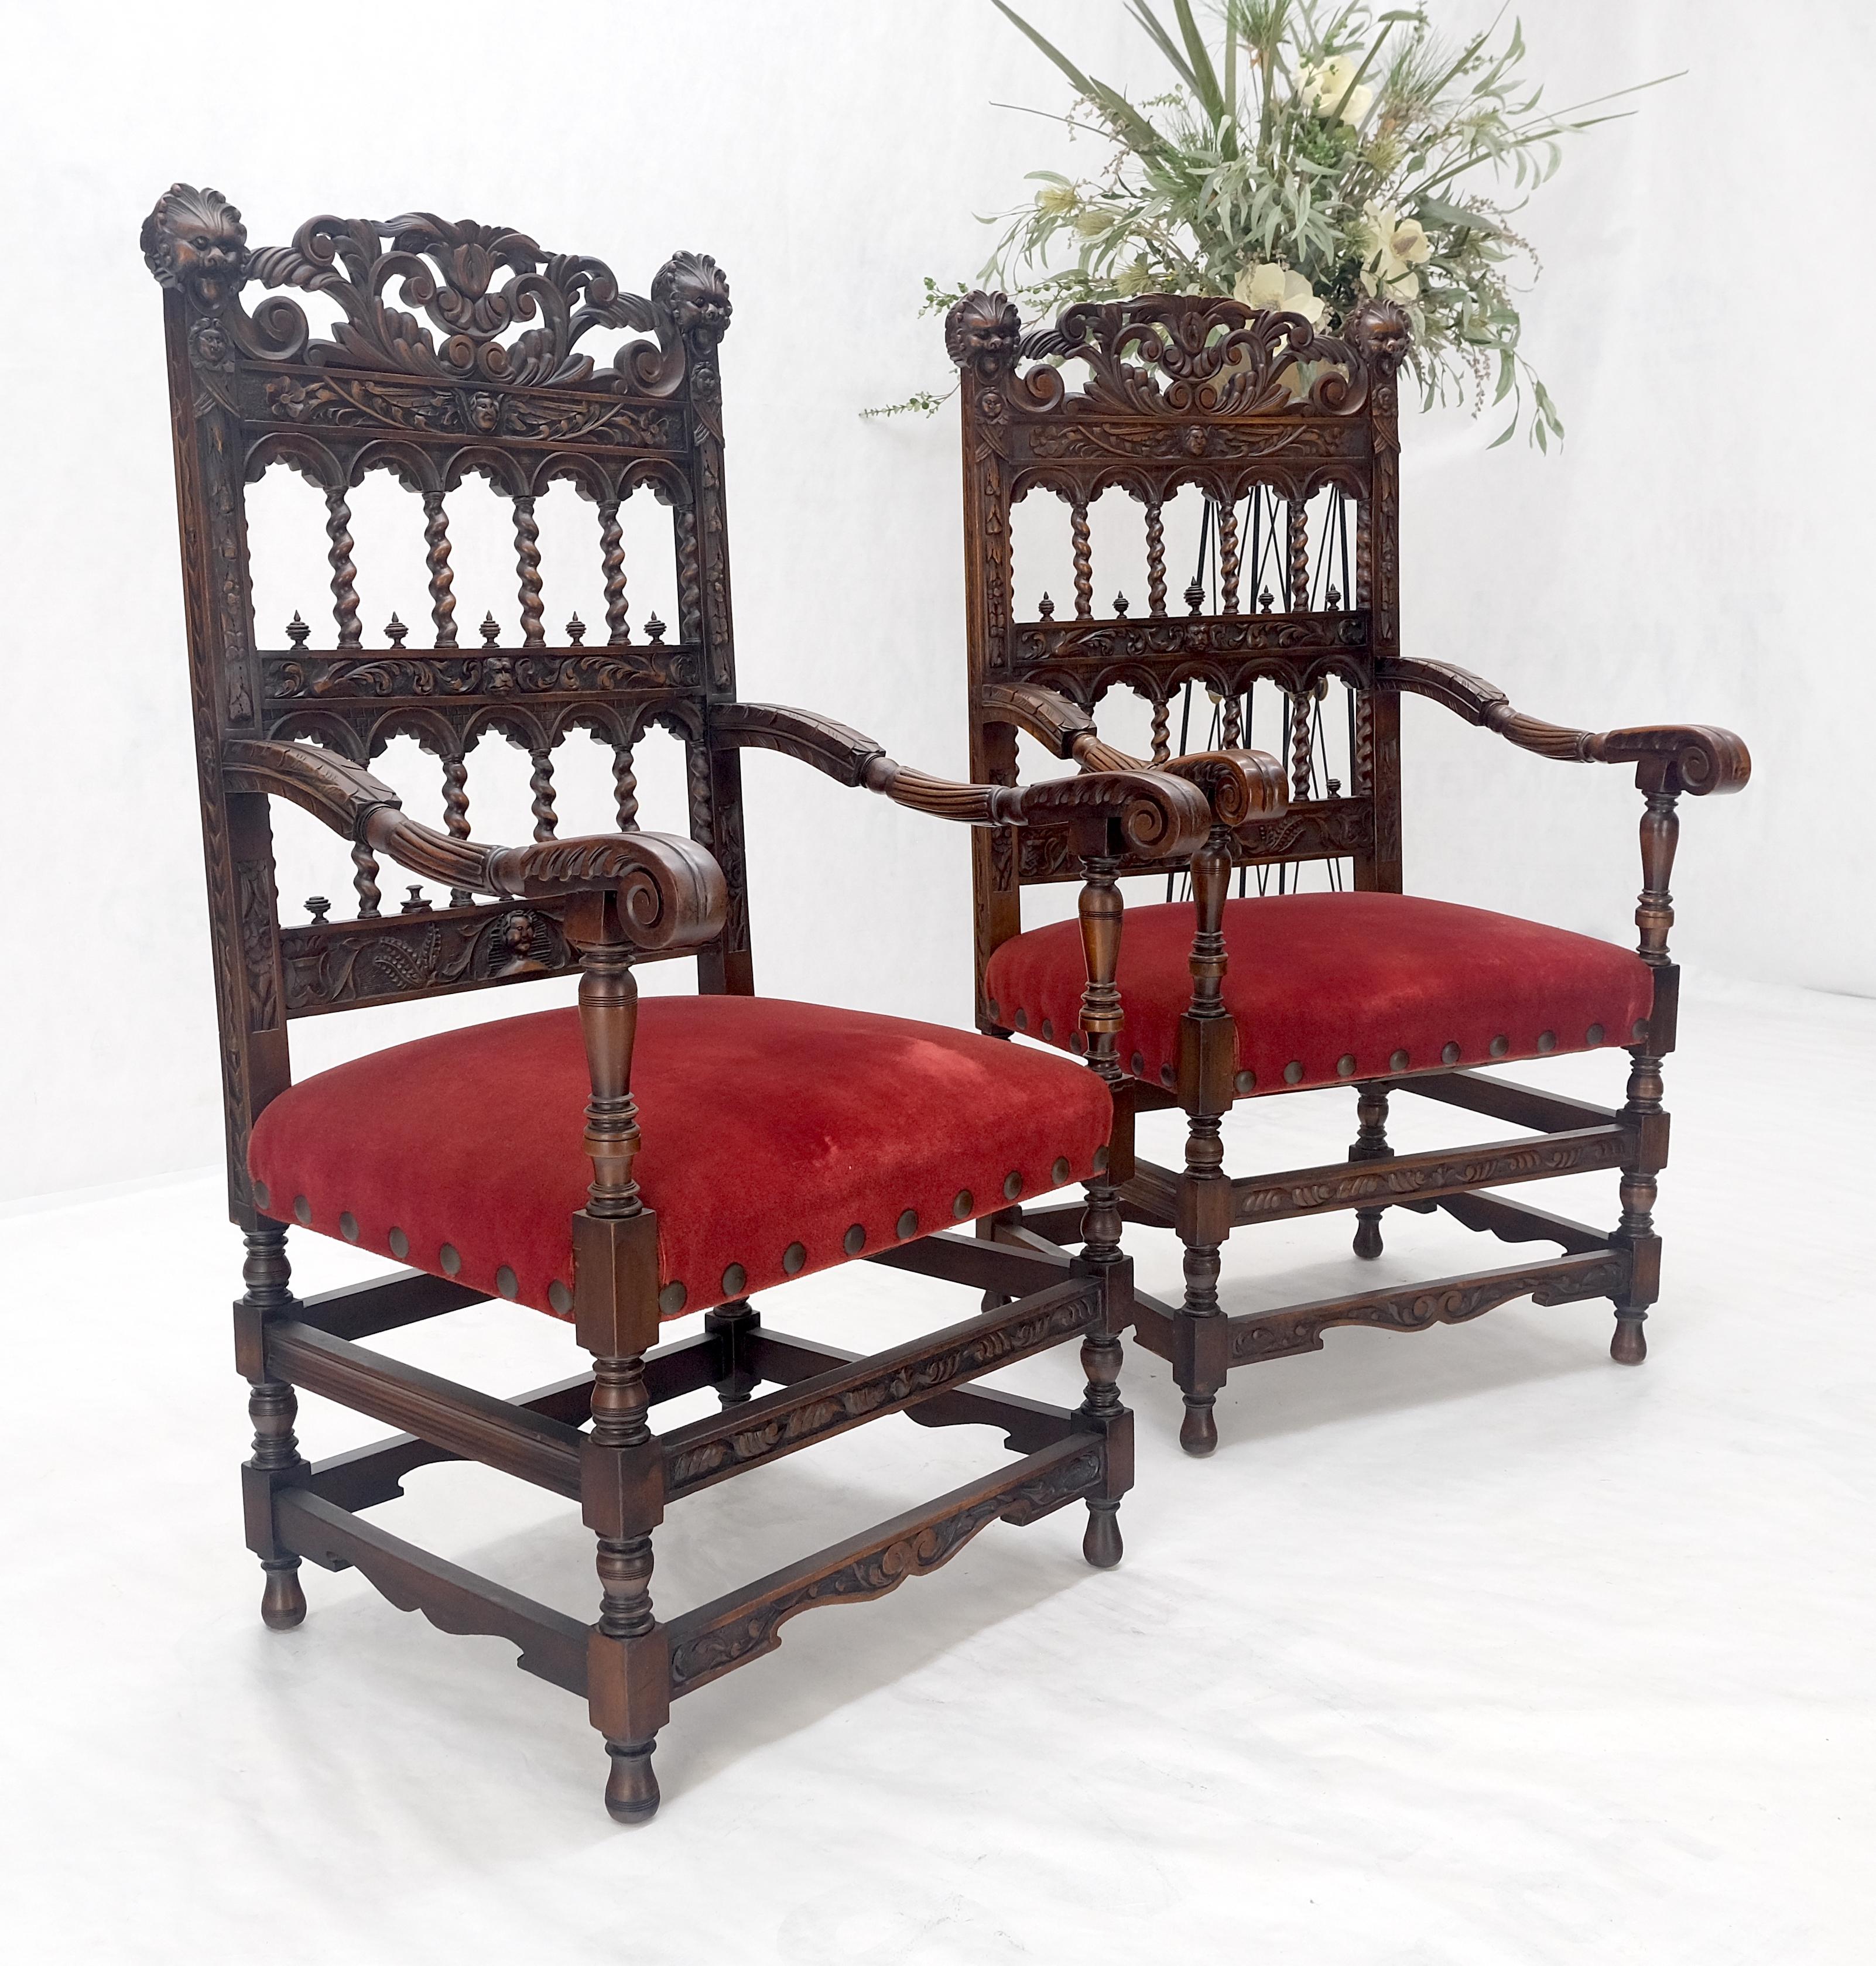 Fine Carved North Winds Faces Heavy Oak Arm Chairs Twisted Spindles c1900s MINT For Sale 10